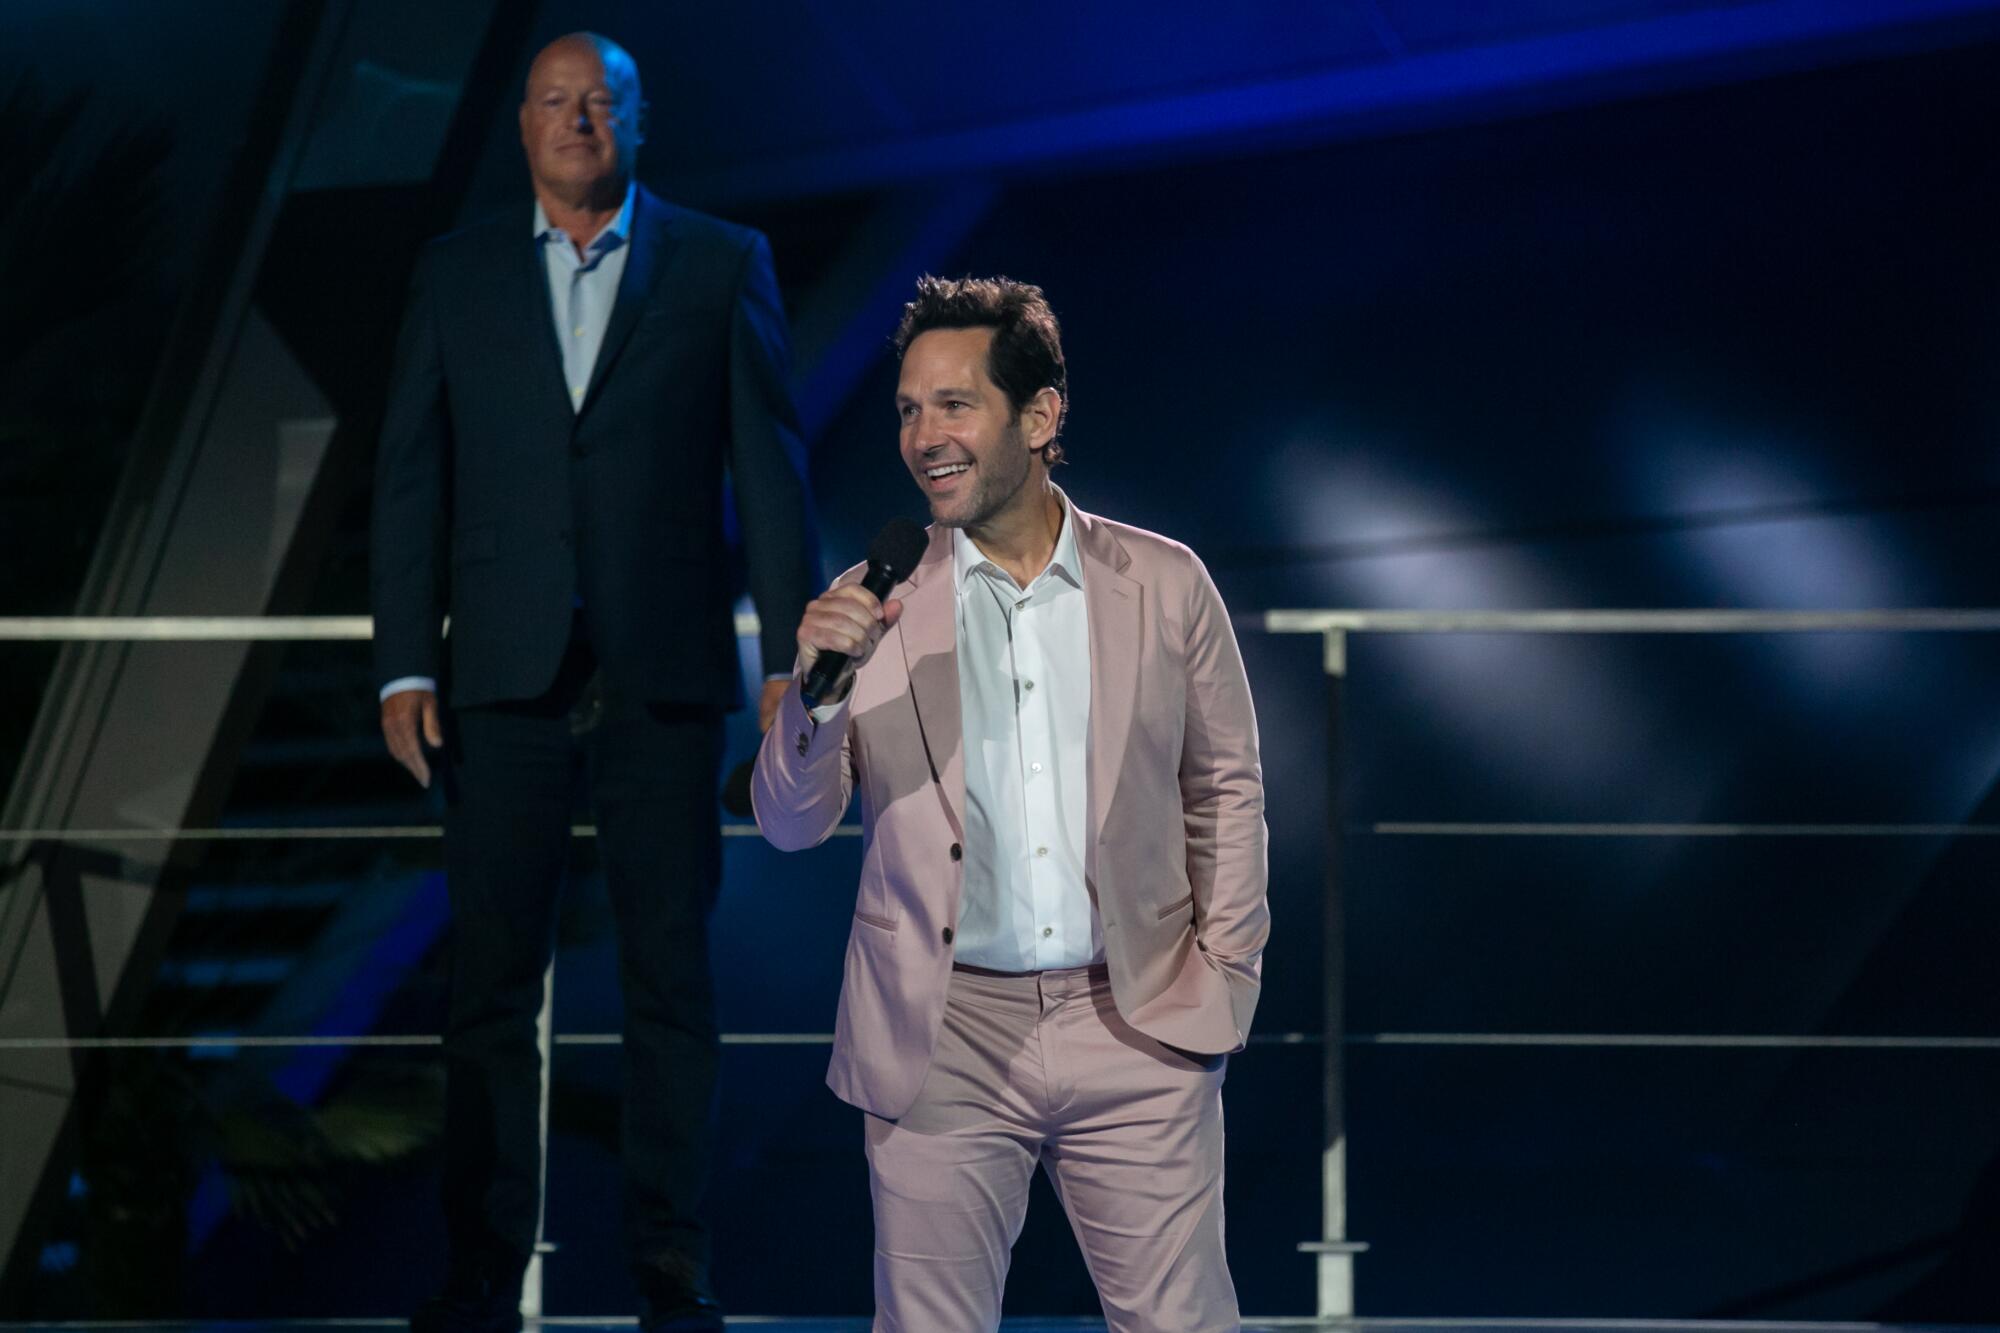 Paul Rudd smiles on stage and speaks into a microphone.